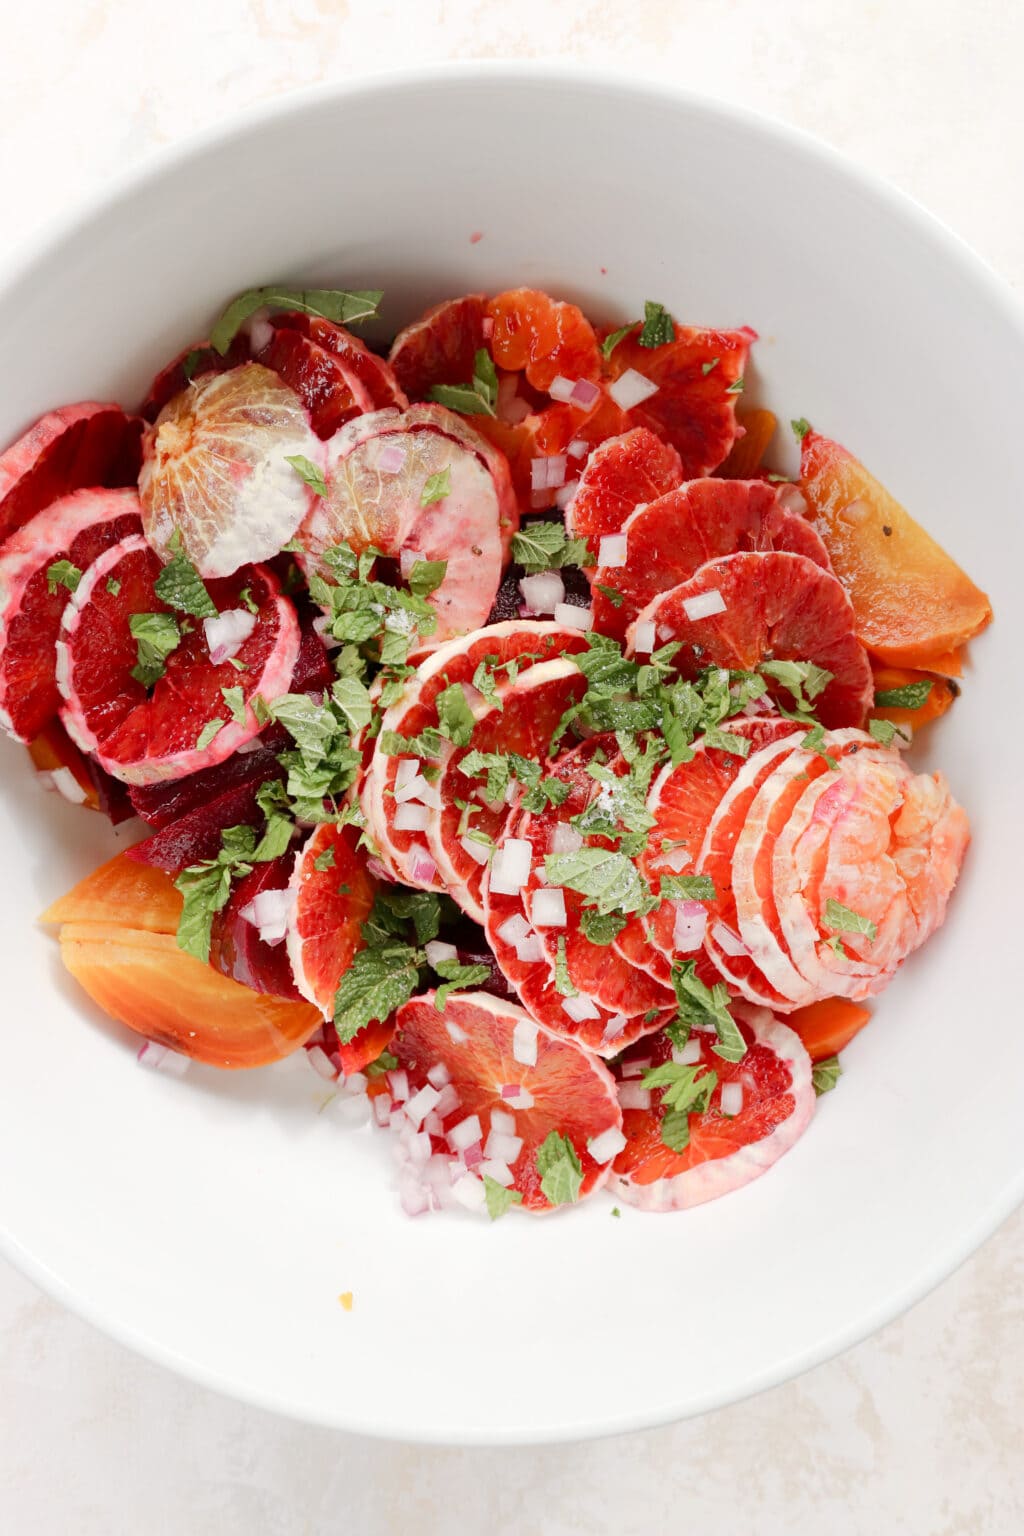 Ingredients for blood orange and roasted beet salad in a white bowl, including blood oranges, roasted beets, and mint